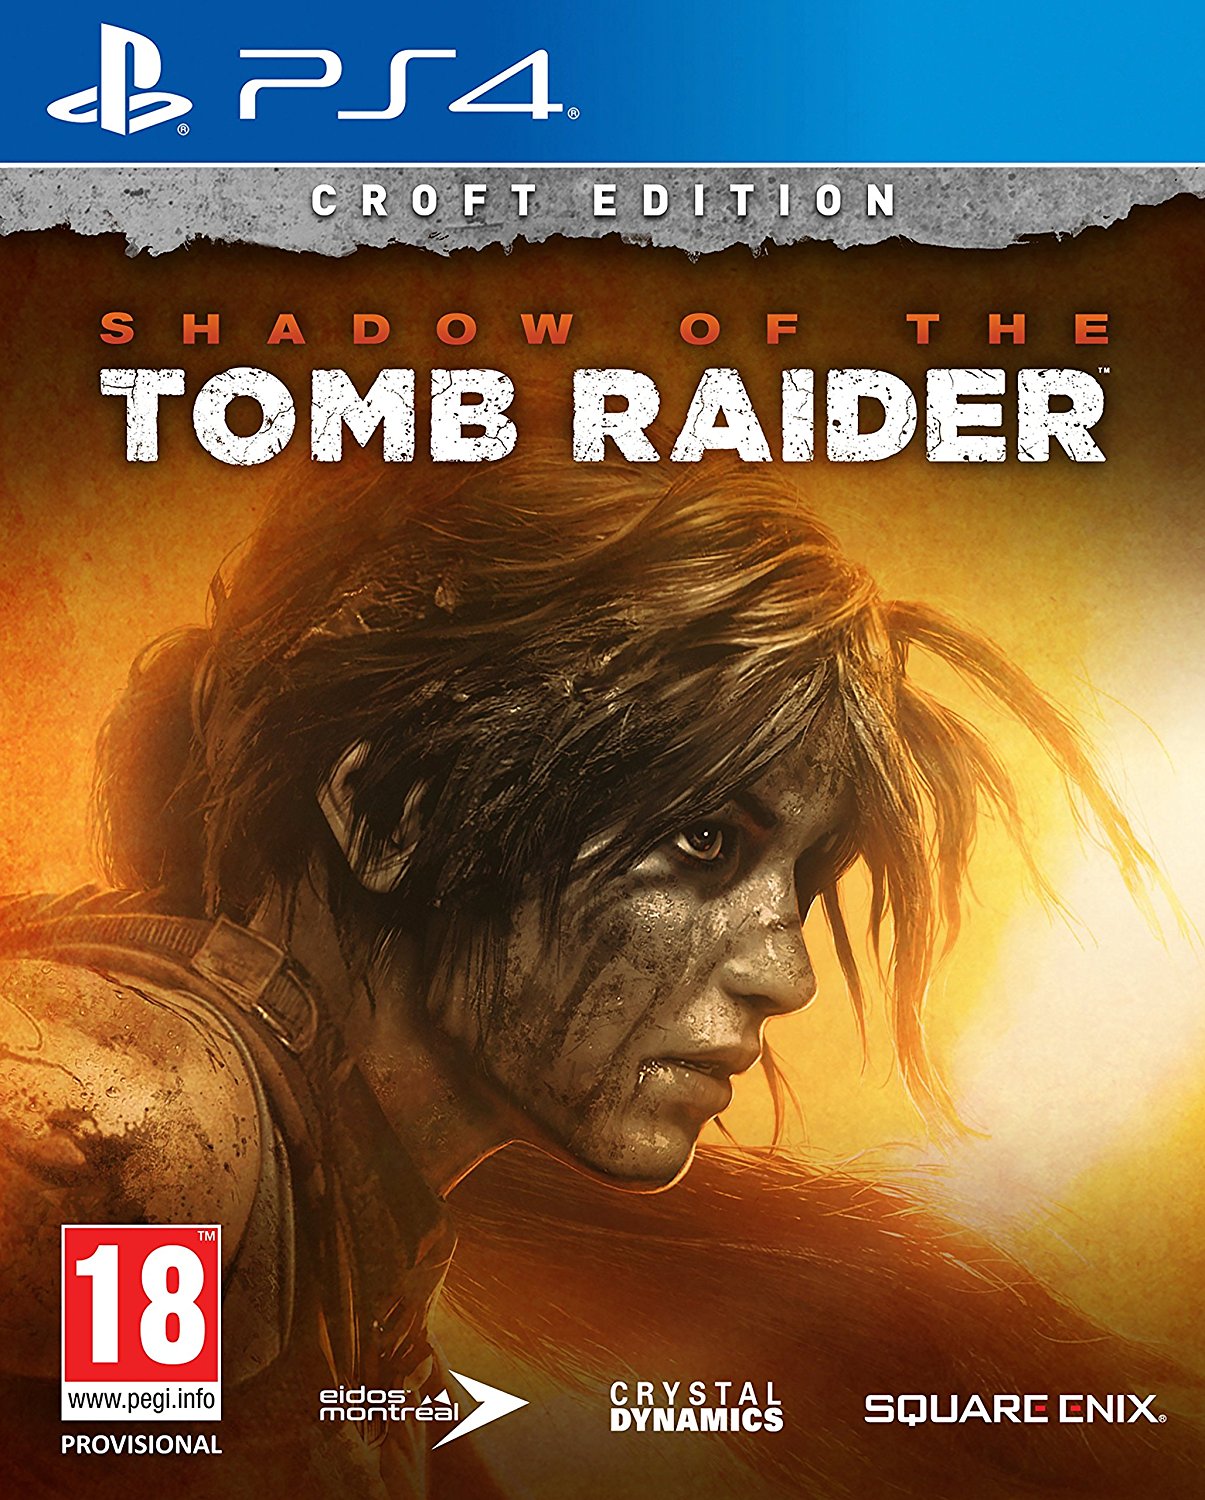 Shadow of the Tomb Raider: Croft Edition (PS4) - Offer Games